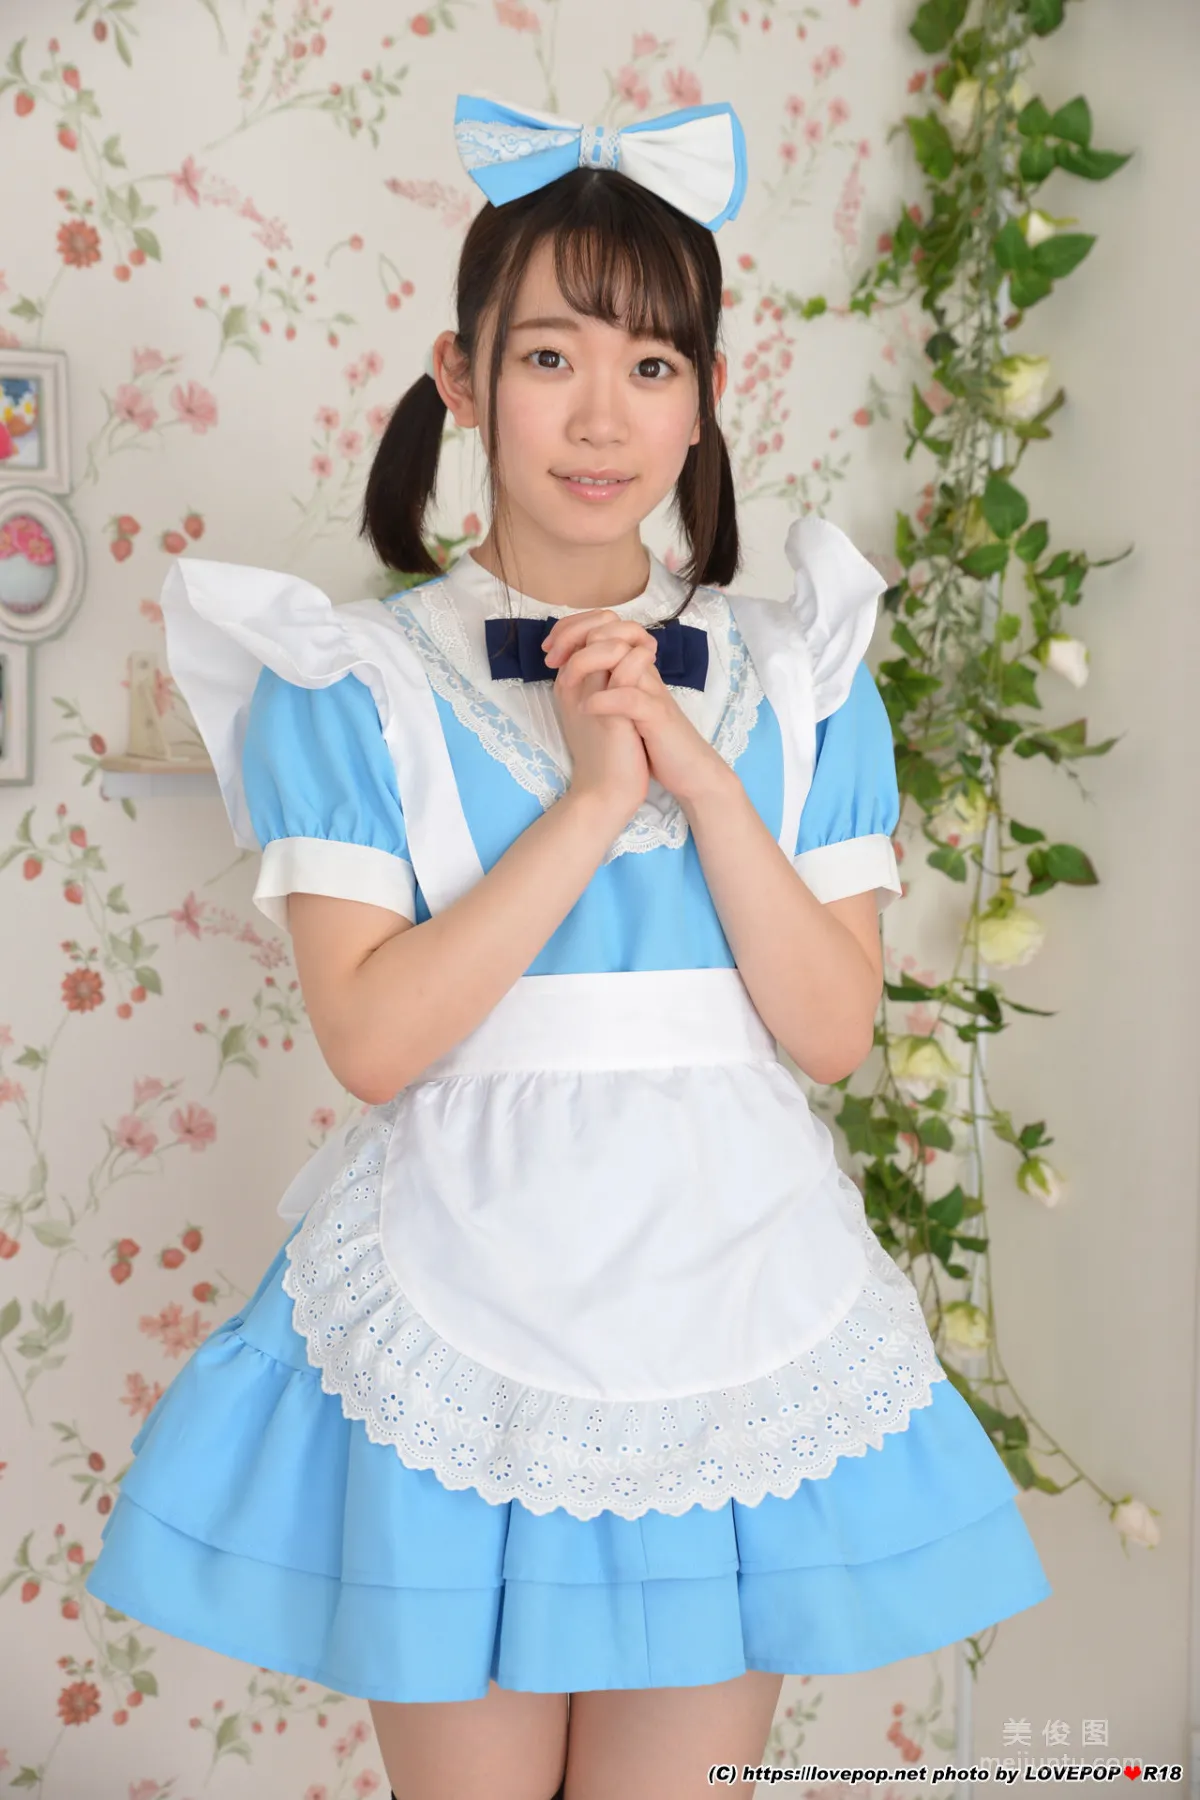 [LOVEPOP] Special Maid Collection - 架乃ゆら Photoset 012